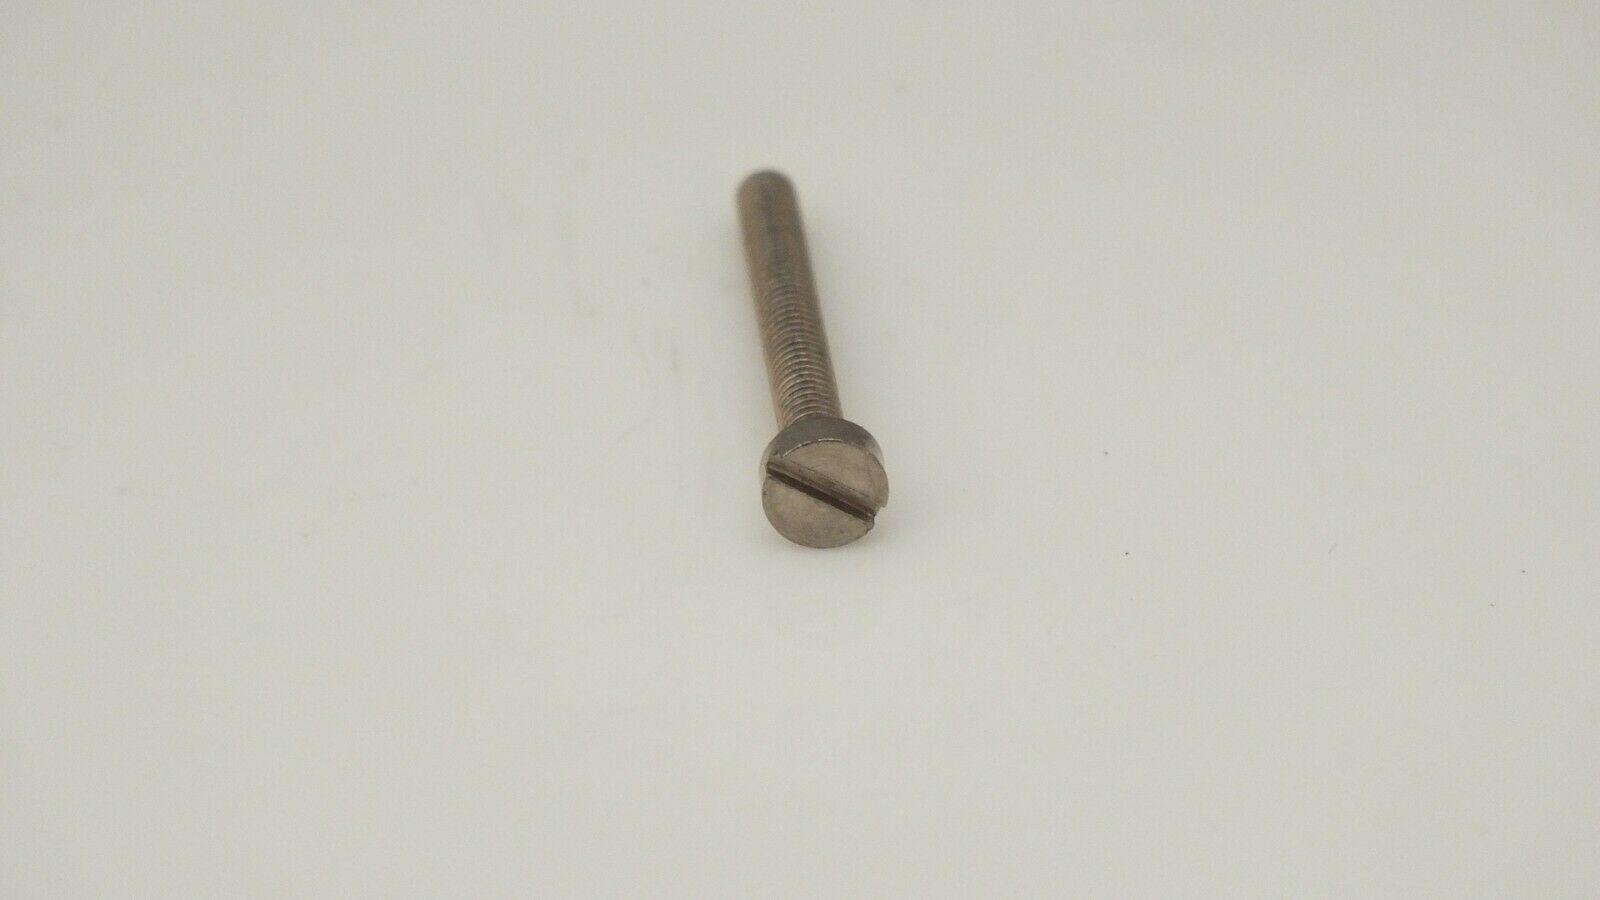 S1101  #  HORNBY TRIANG SMOKE UNIT FIXING BOLT MULTI FIT SEE DESC  G9A